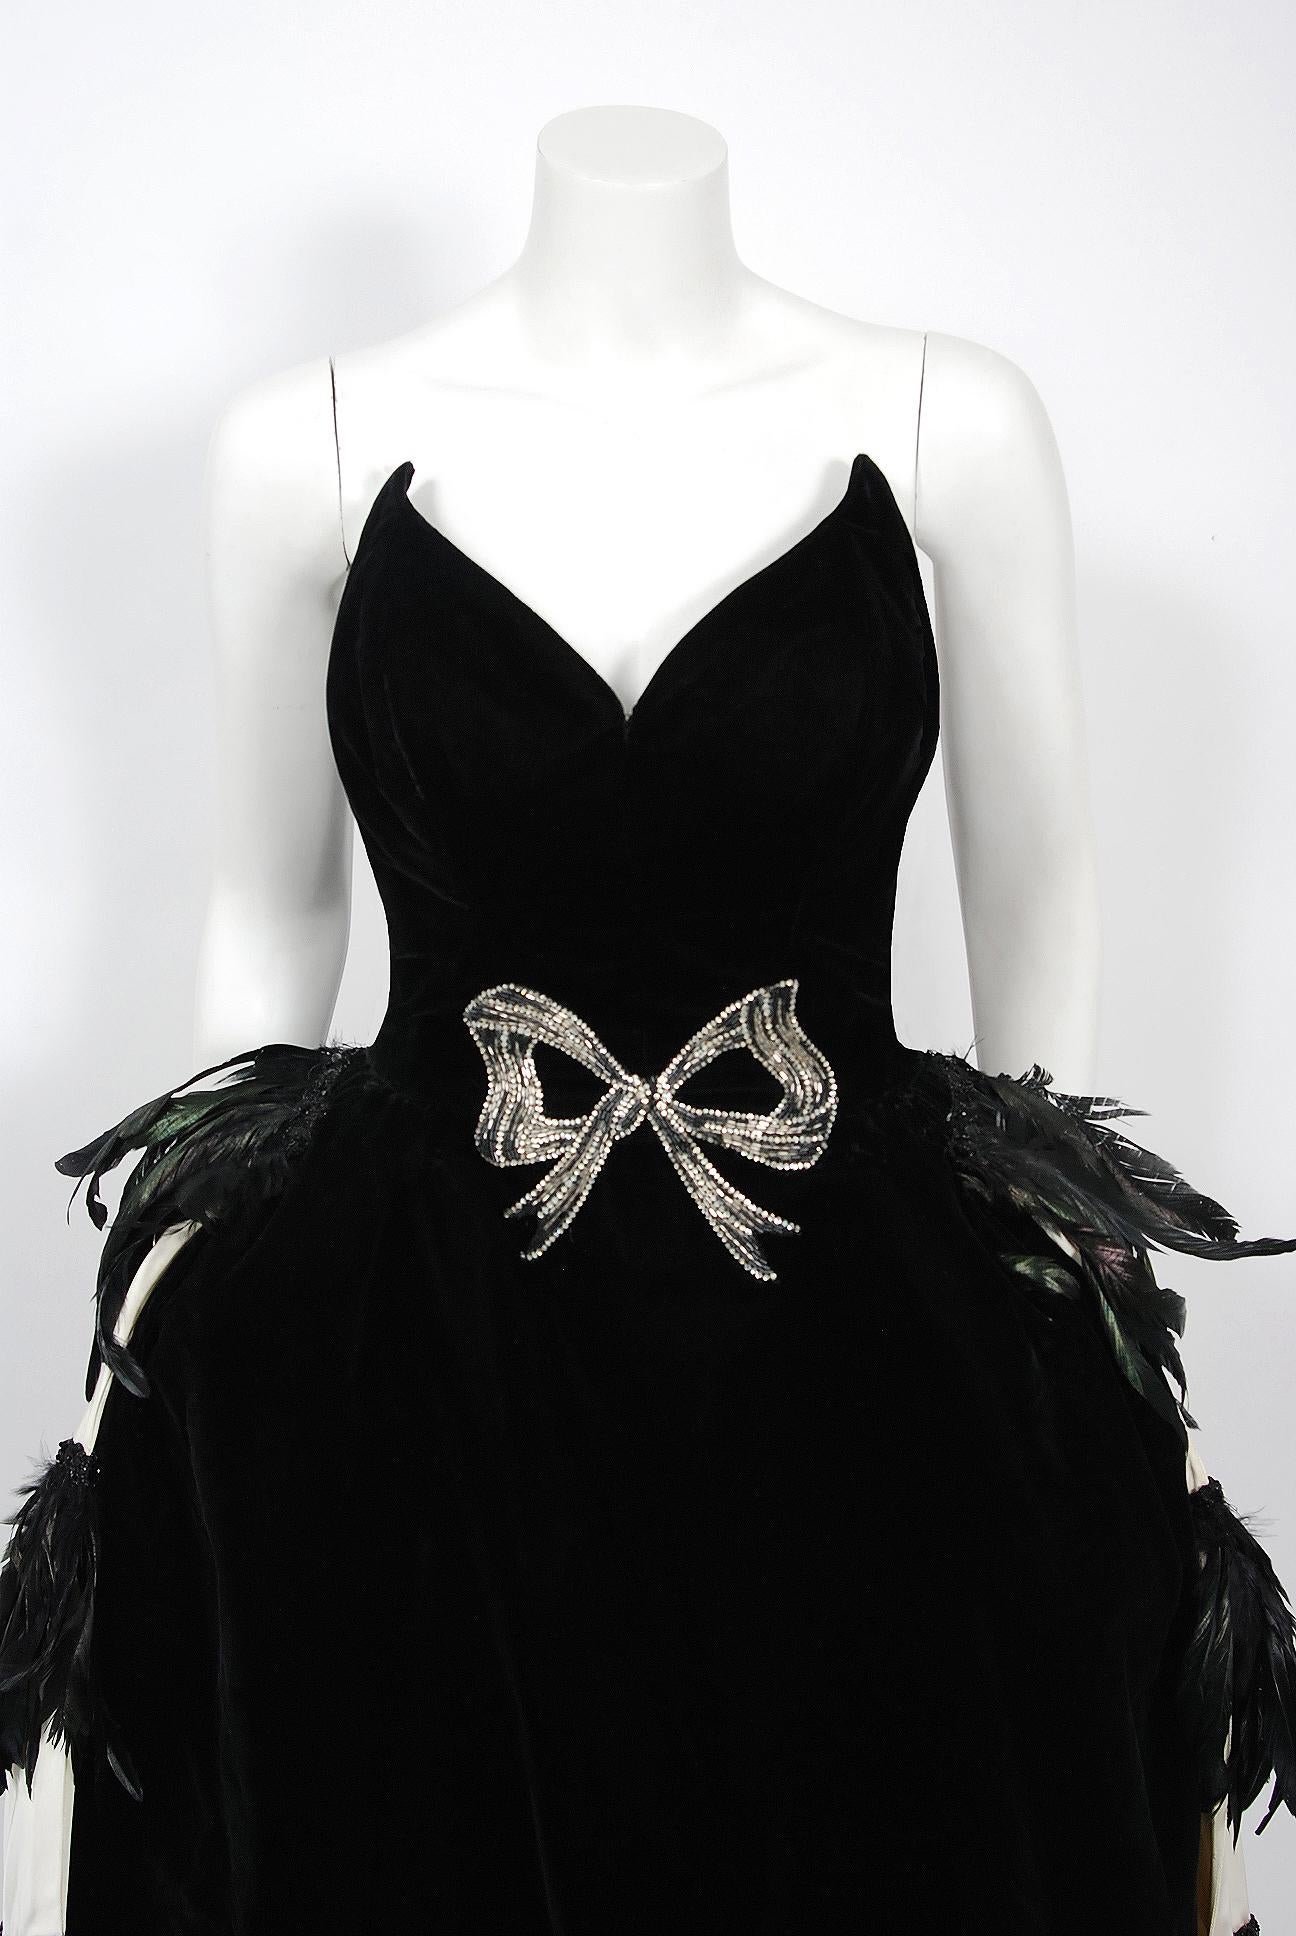 A truly breathtaking and one-of-a-kind couture creation by Brooks Costume Company. The Brooks Costume Company was the foremost maker of theatrical costumes in New York in the early part of the twentieth century and this dramatic gown is a testament